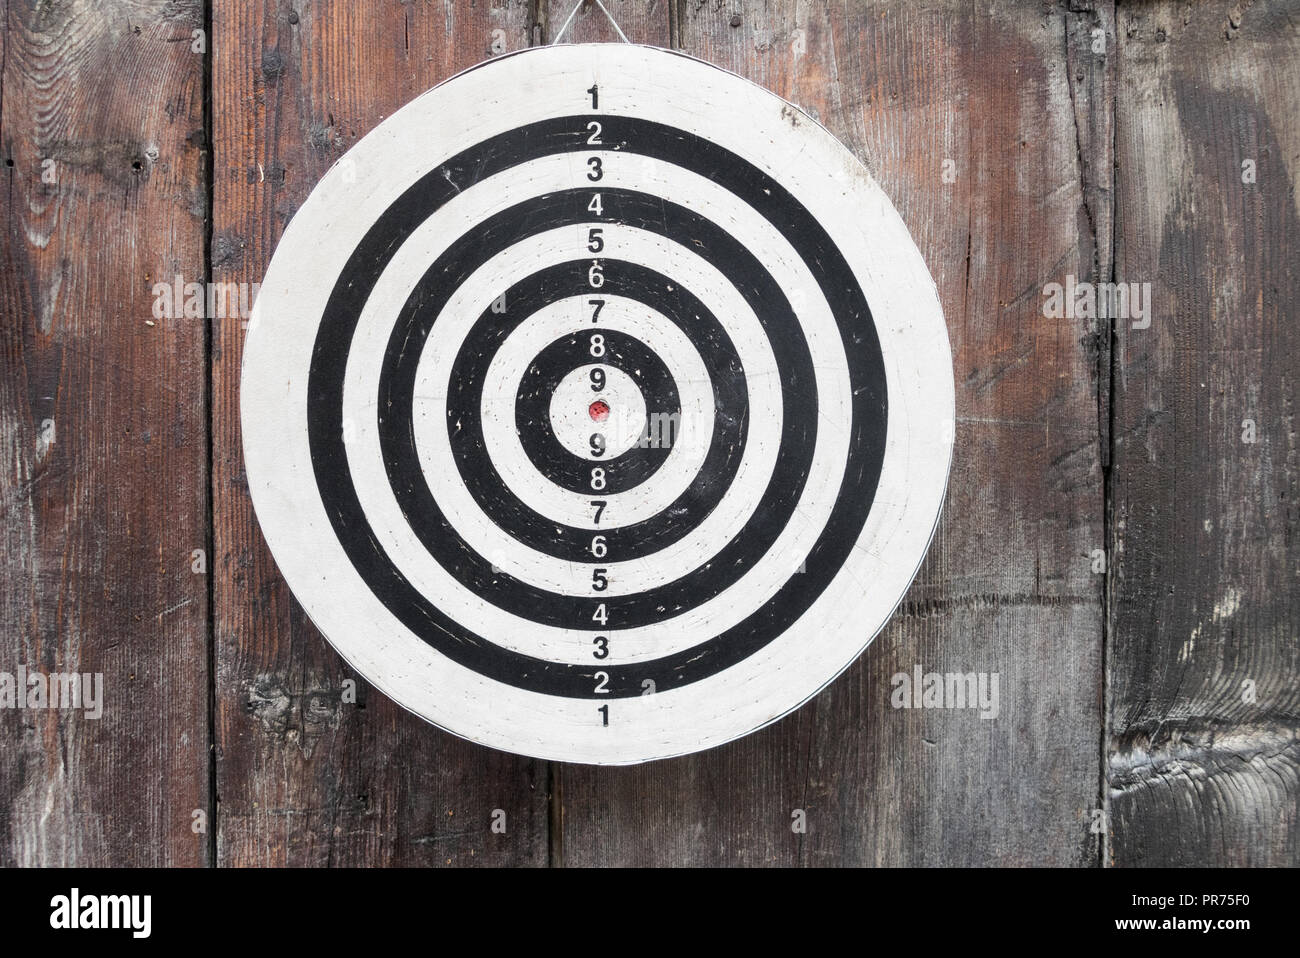 round circular black and white target with numbers hanging on a wooden wall up close and in detail Stock Photo